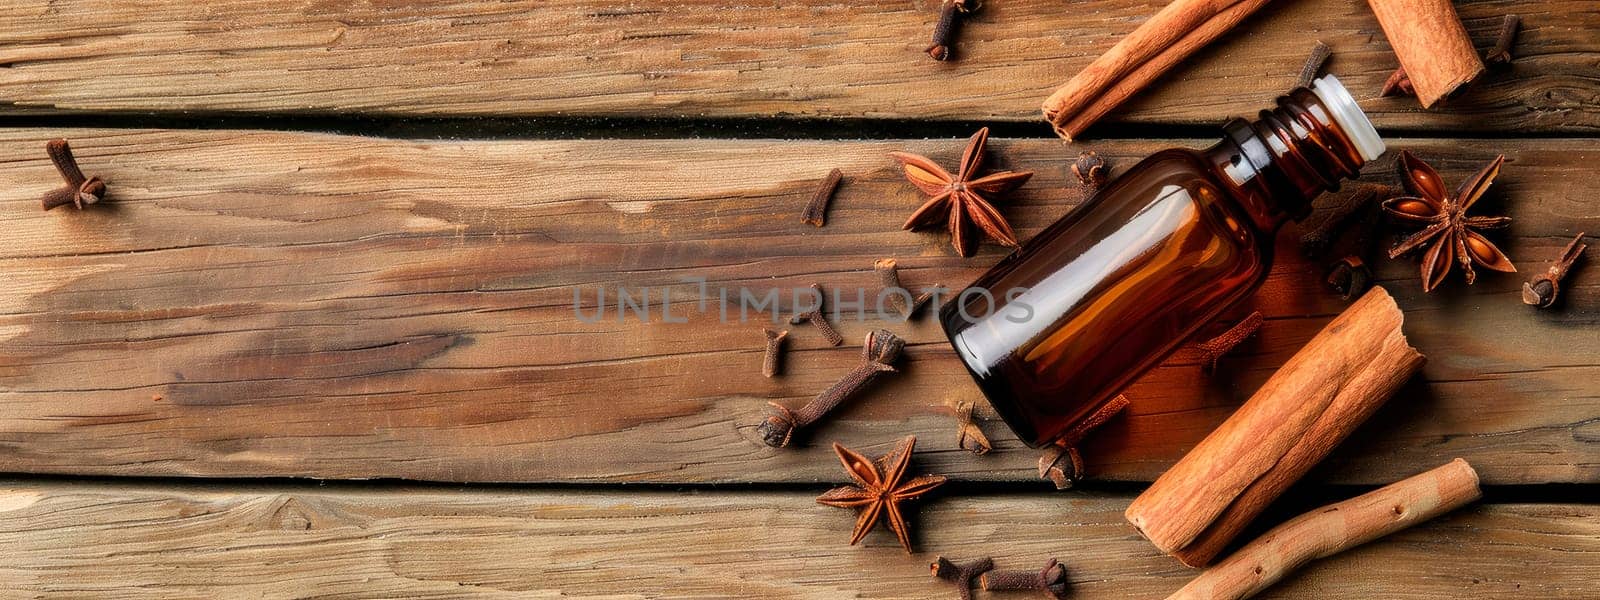 essential oil in a bottle and cinnamon. selective focus. nature.